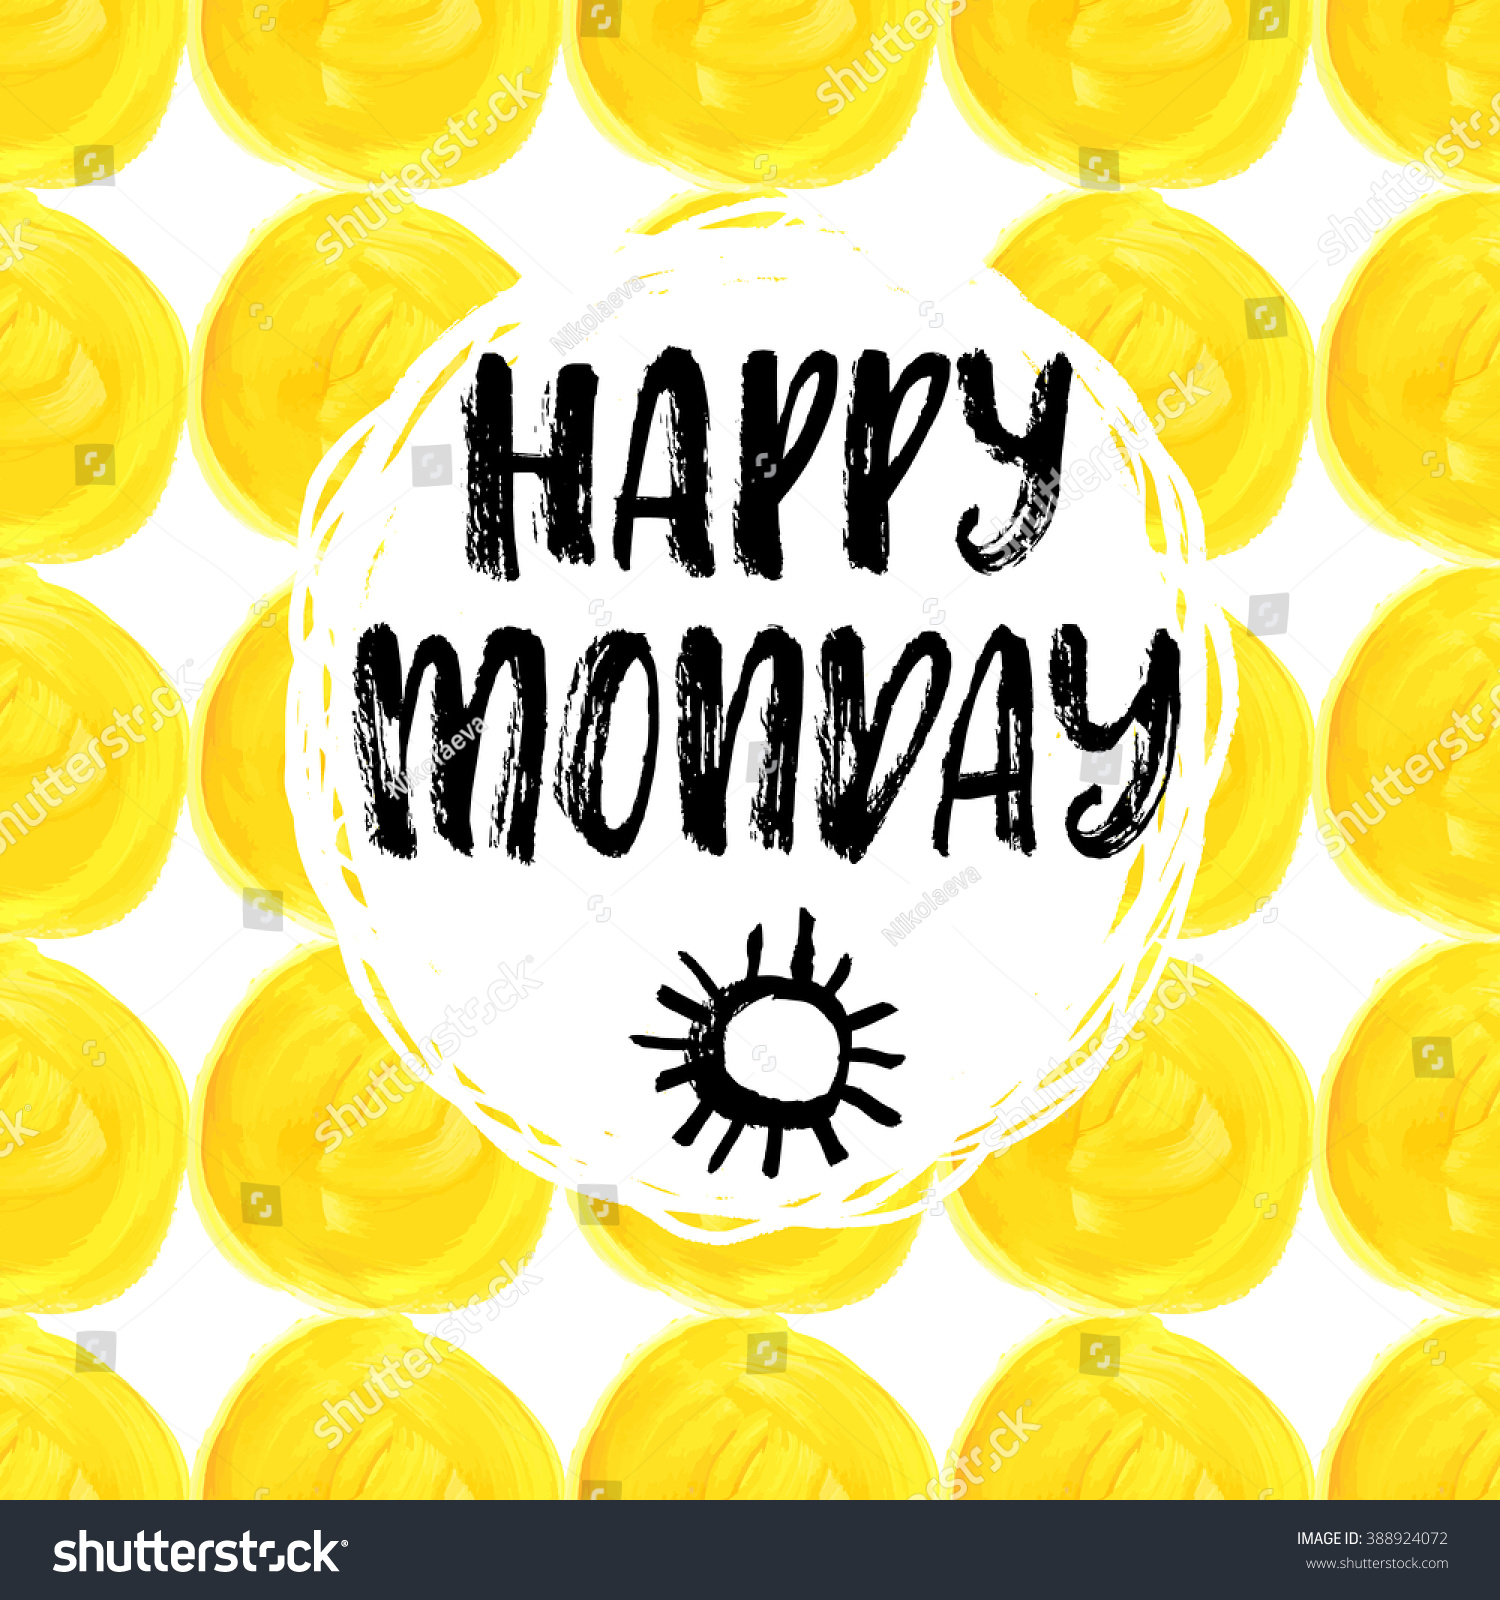 Happy monday sign Images, Stock Photos & Vectors | Shutterstock